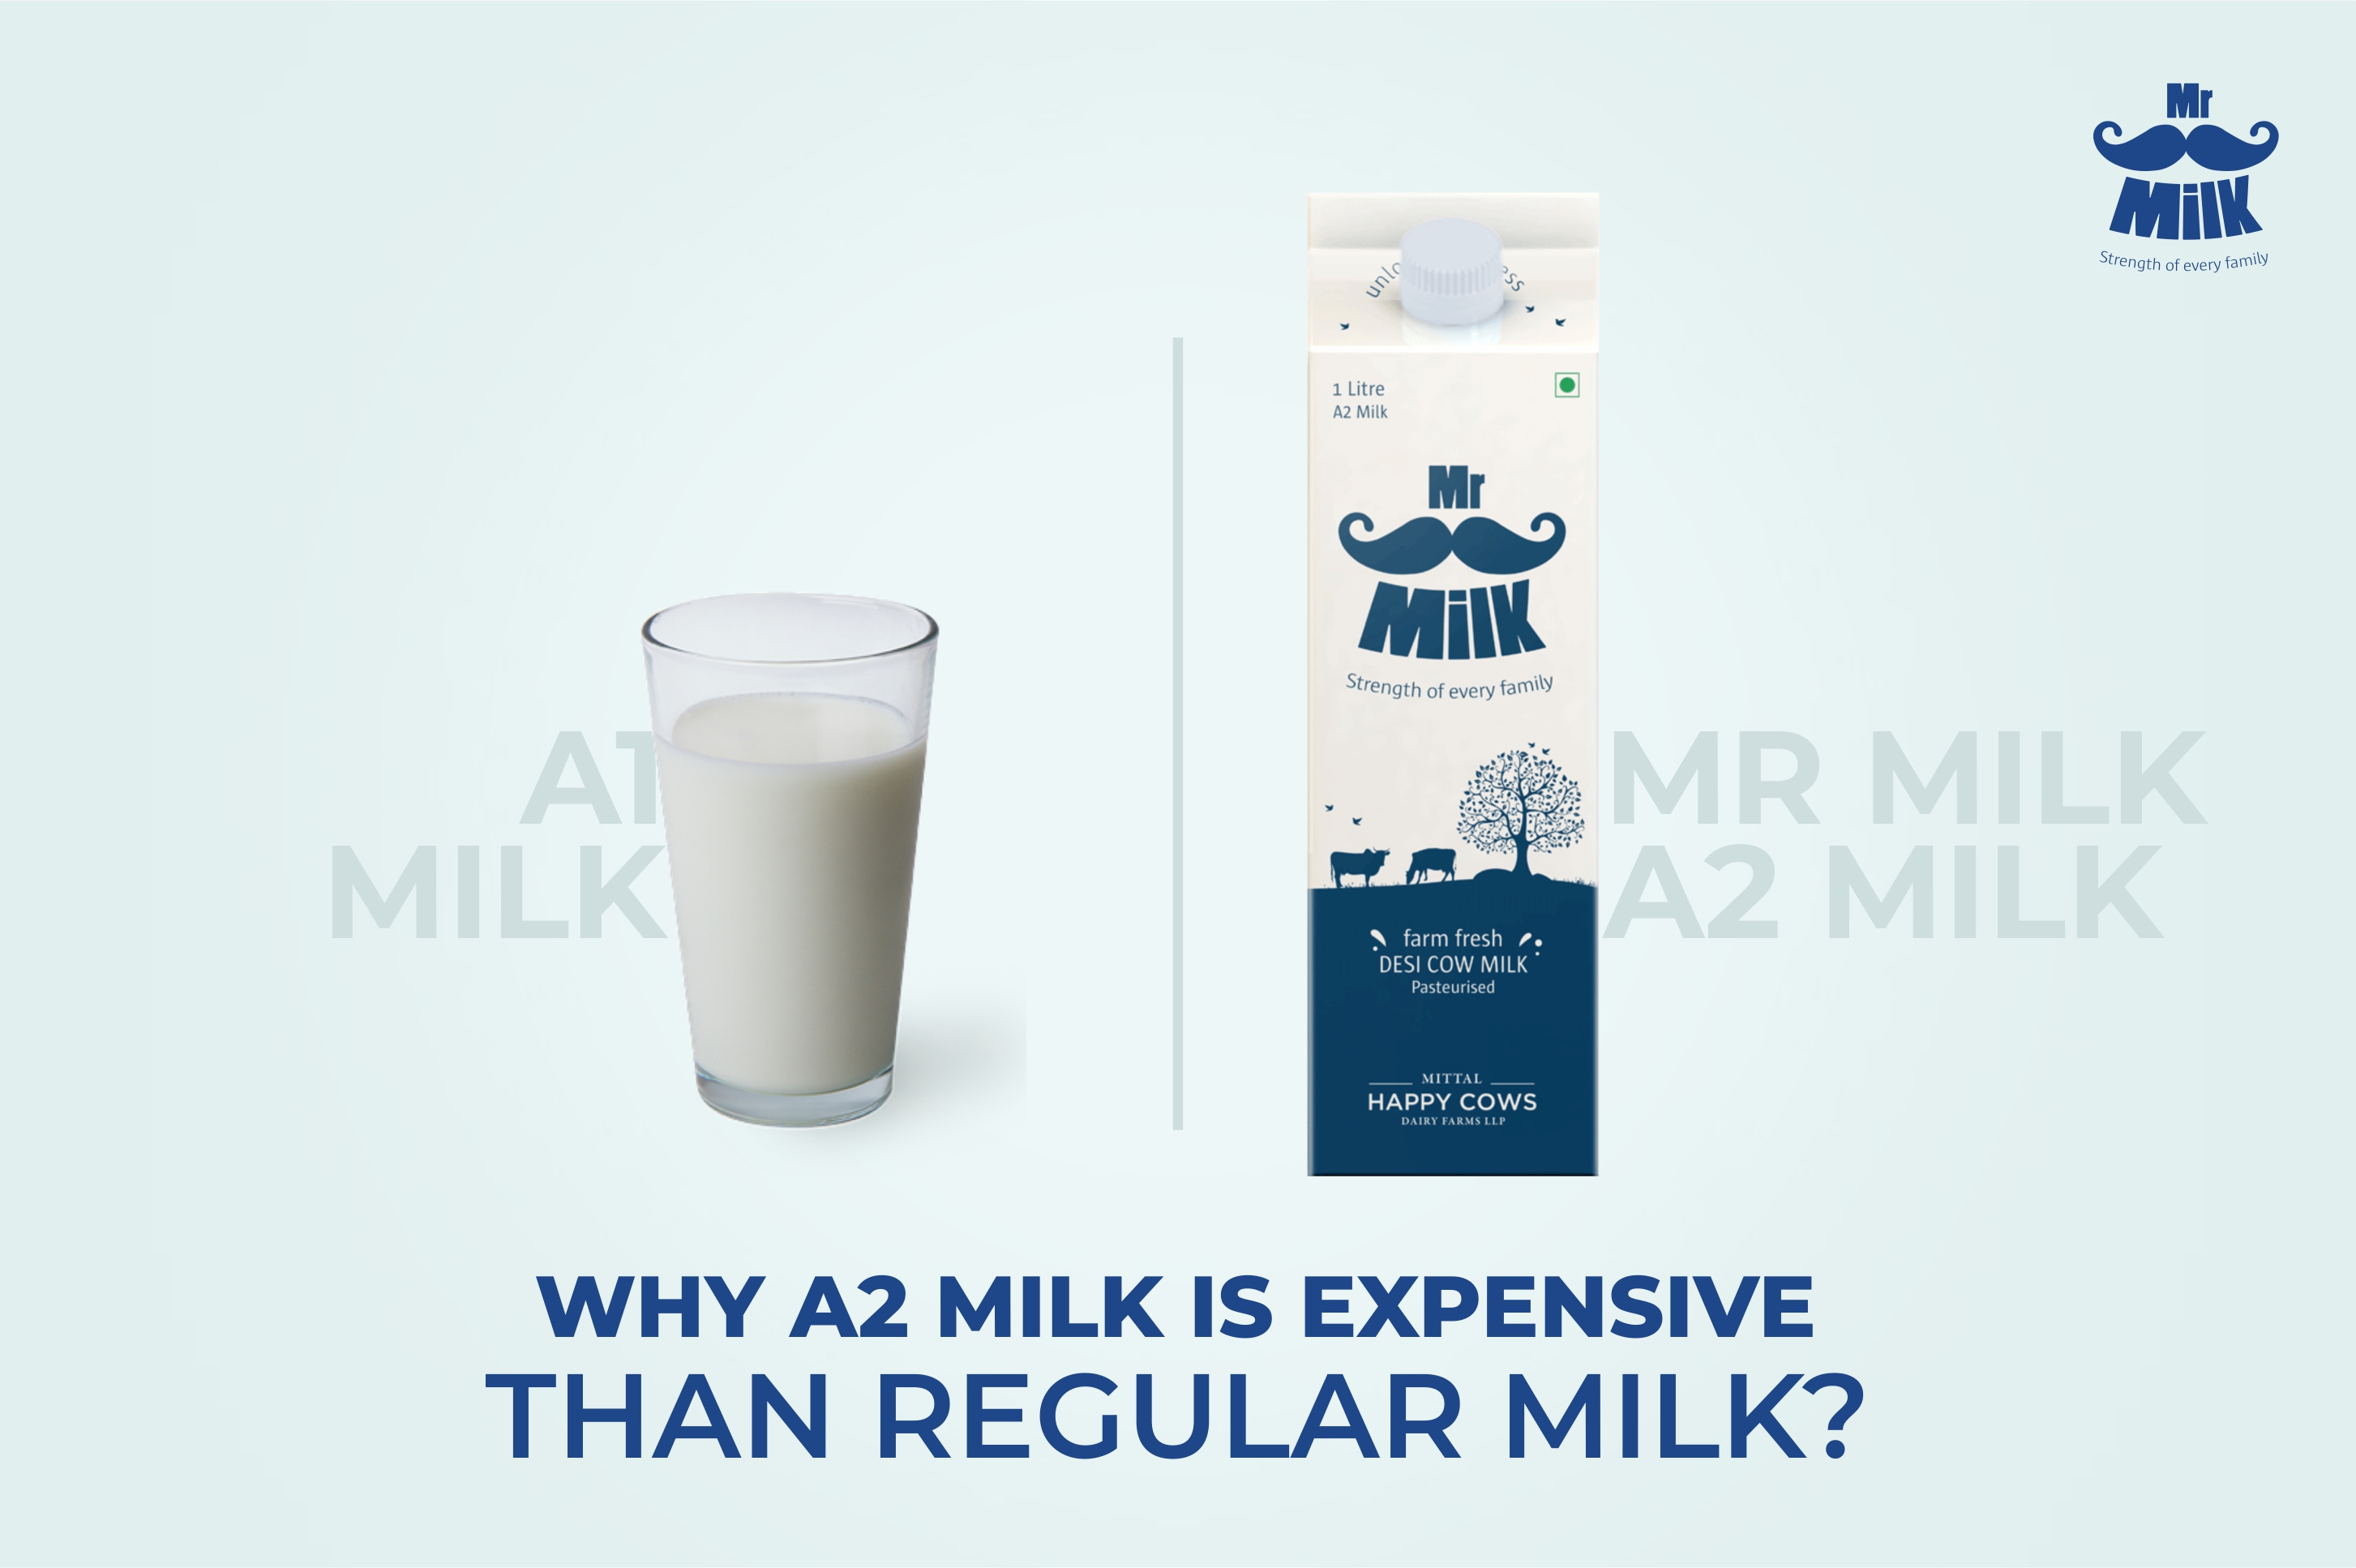 Why A2 milk is expensive than regular milk?